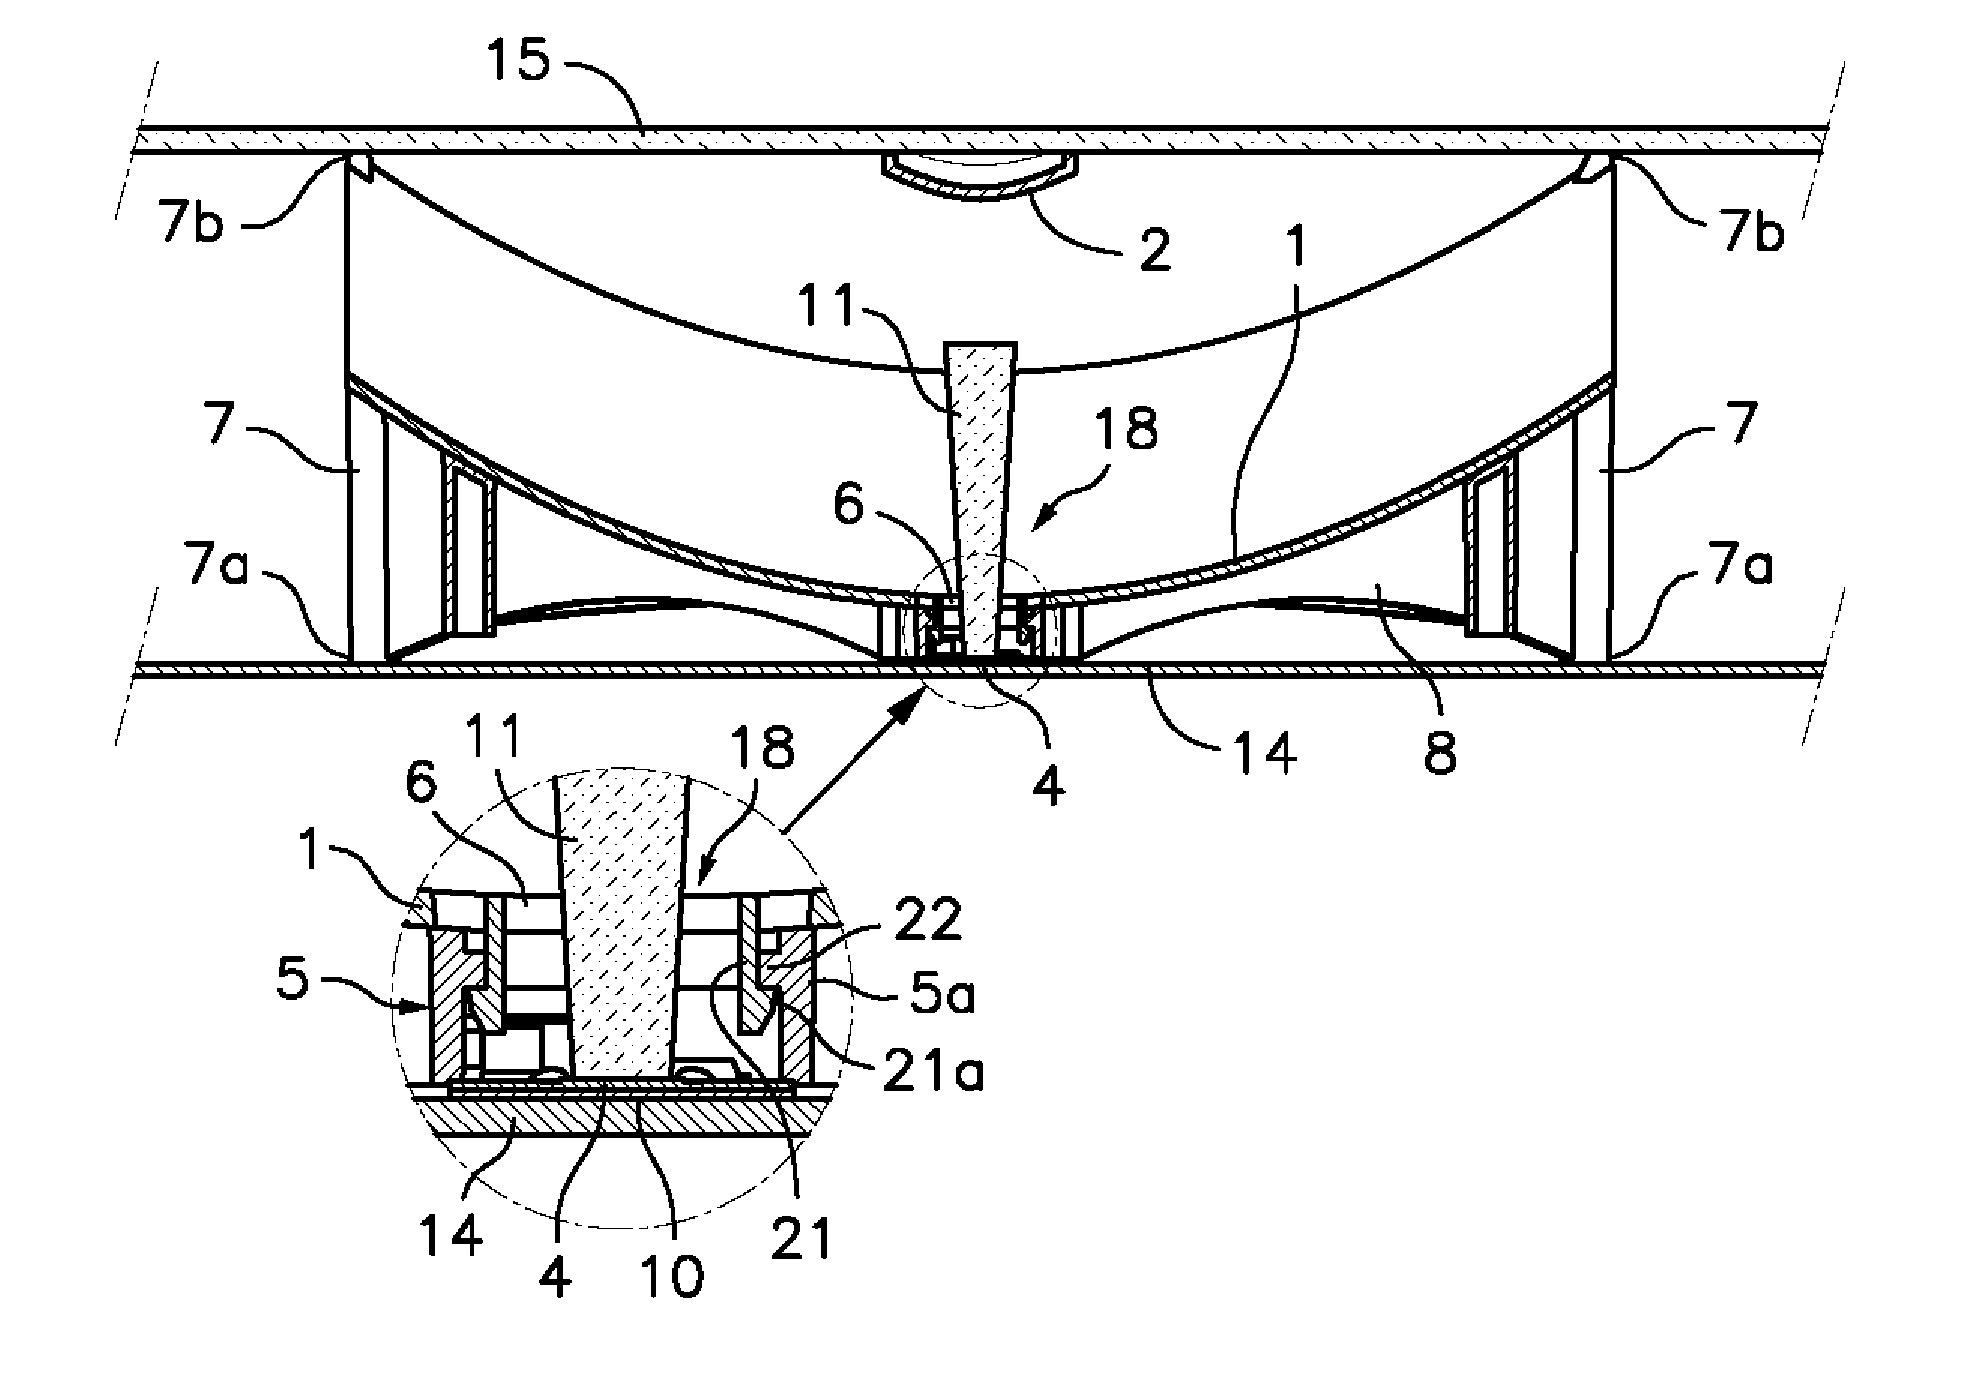 Solar-energy collector/concentrator with cassegrain-type optics